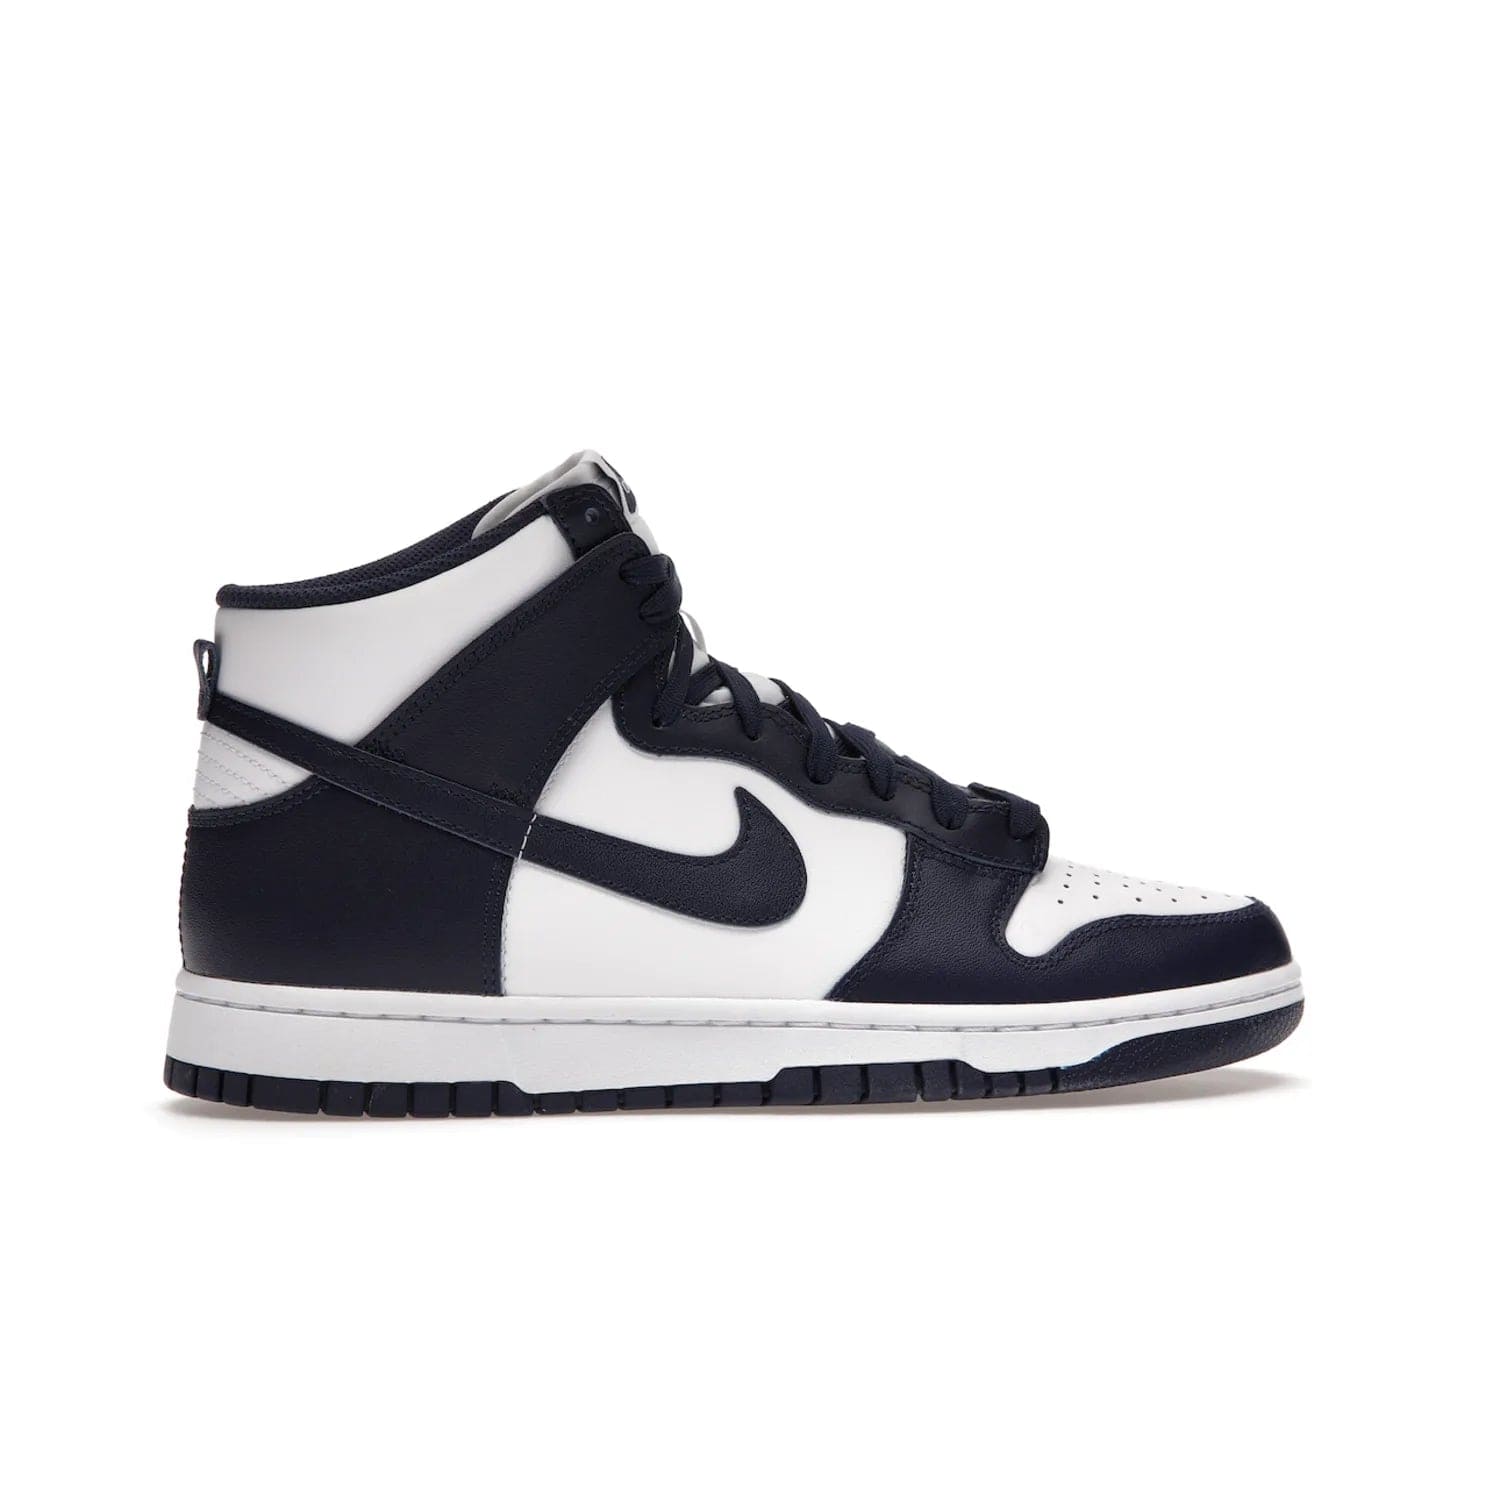 Nike Dunk High Championship Navy - Image 36 - Only at www.BallersClubKickz.com - Classic Nike Dunk High sneaker delivers an unforgettable style with white leather upper, Championship Navy overlays, and matching woven tongue label and sole. Make a statement with the Championship Navy today.